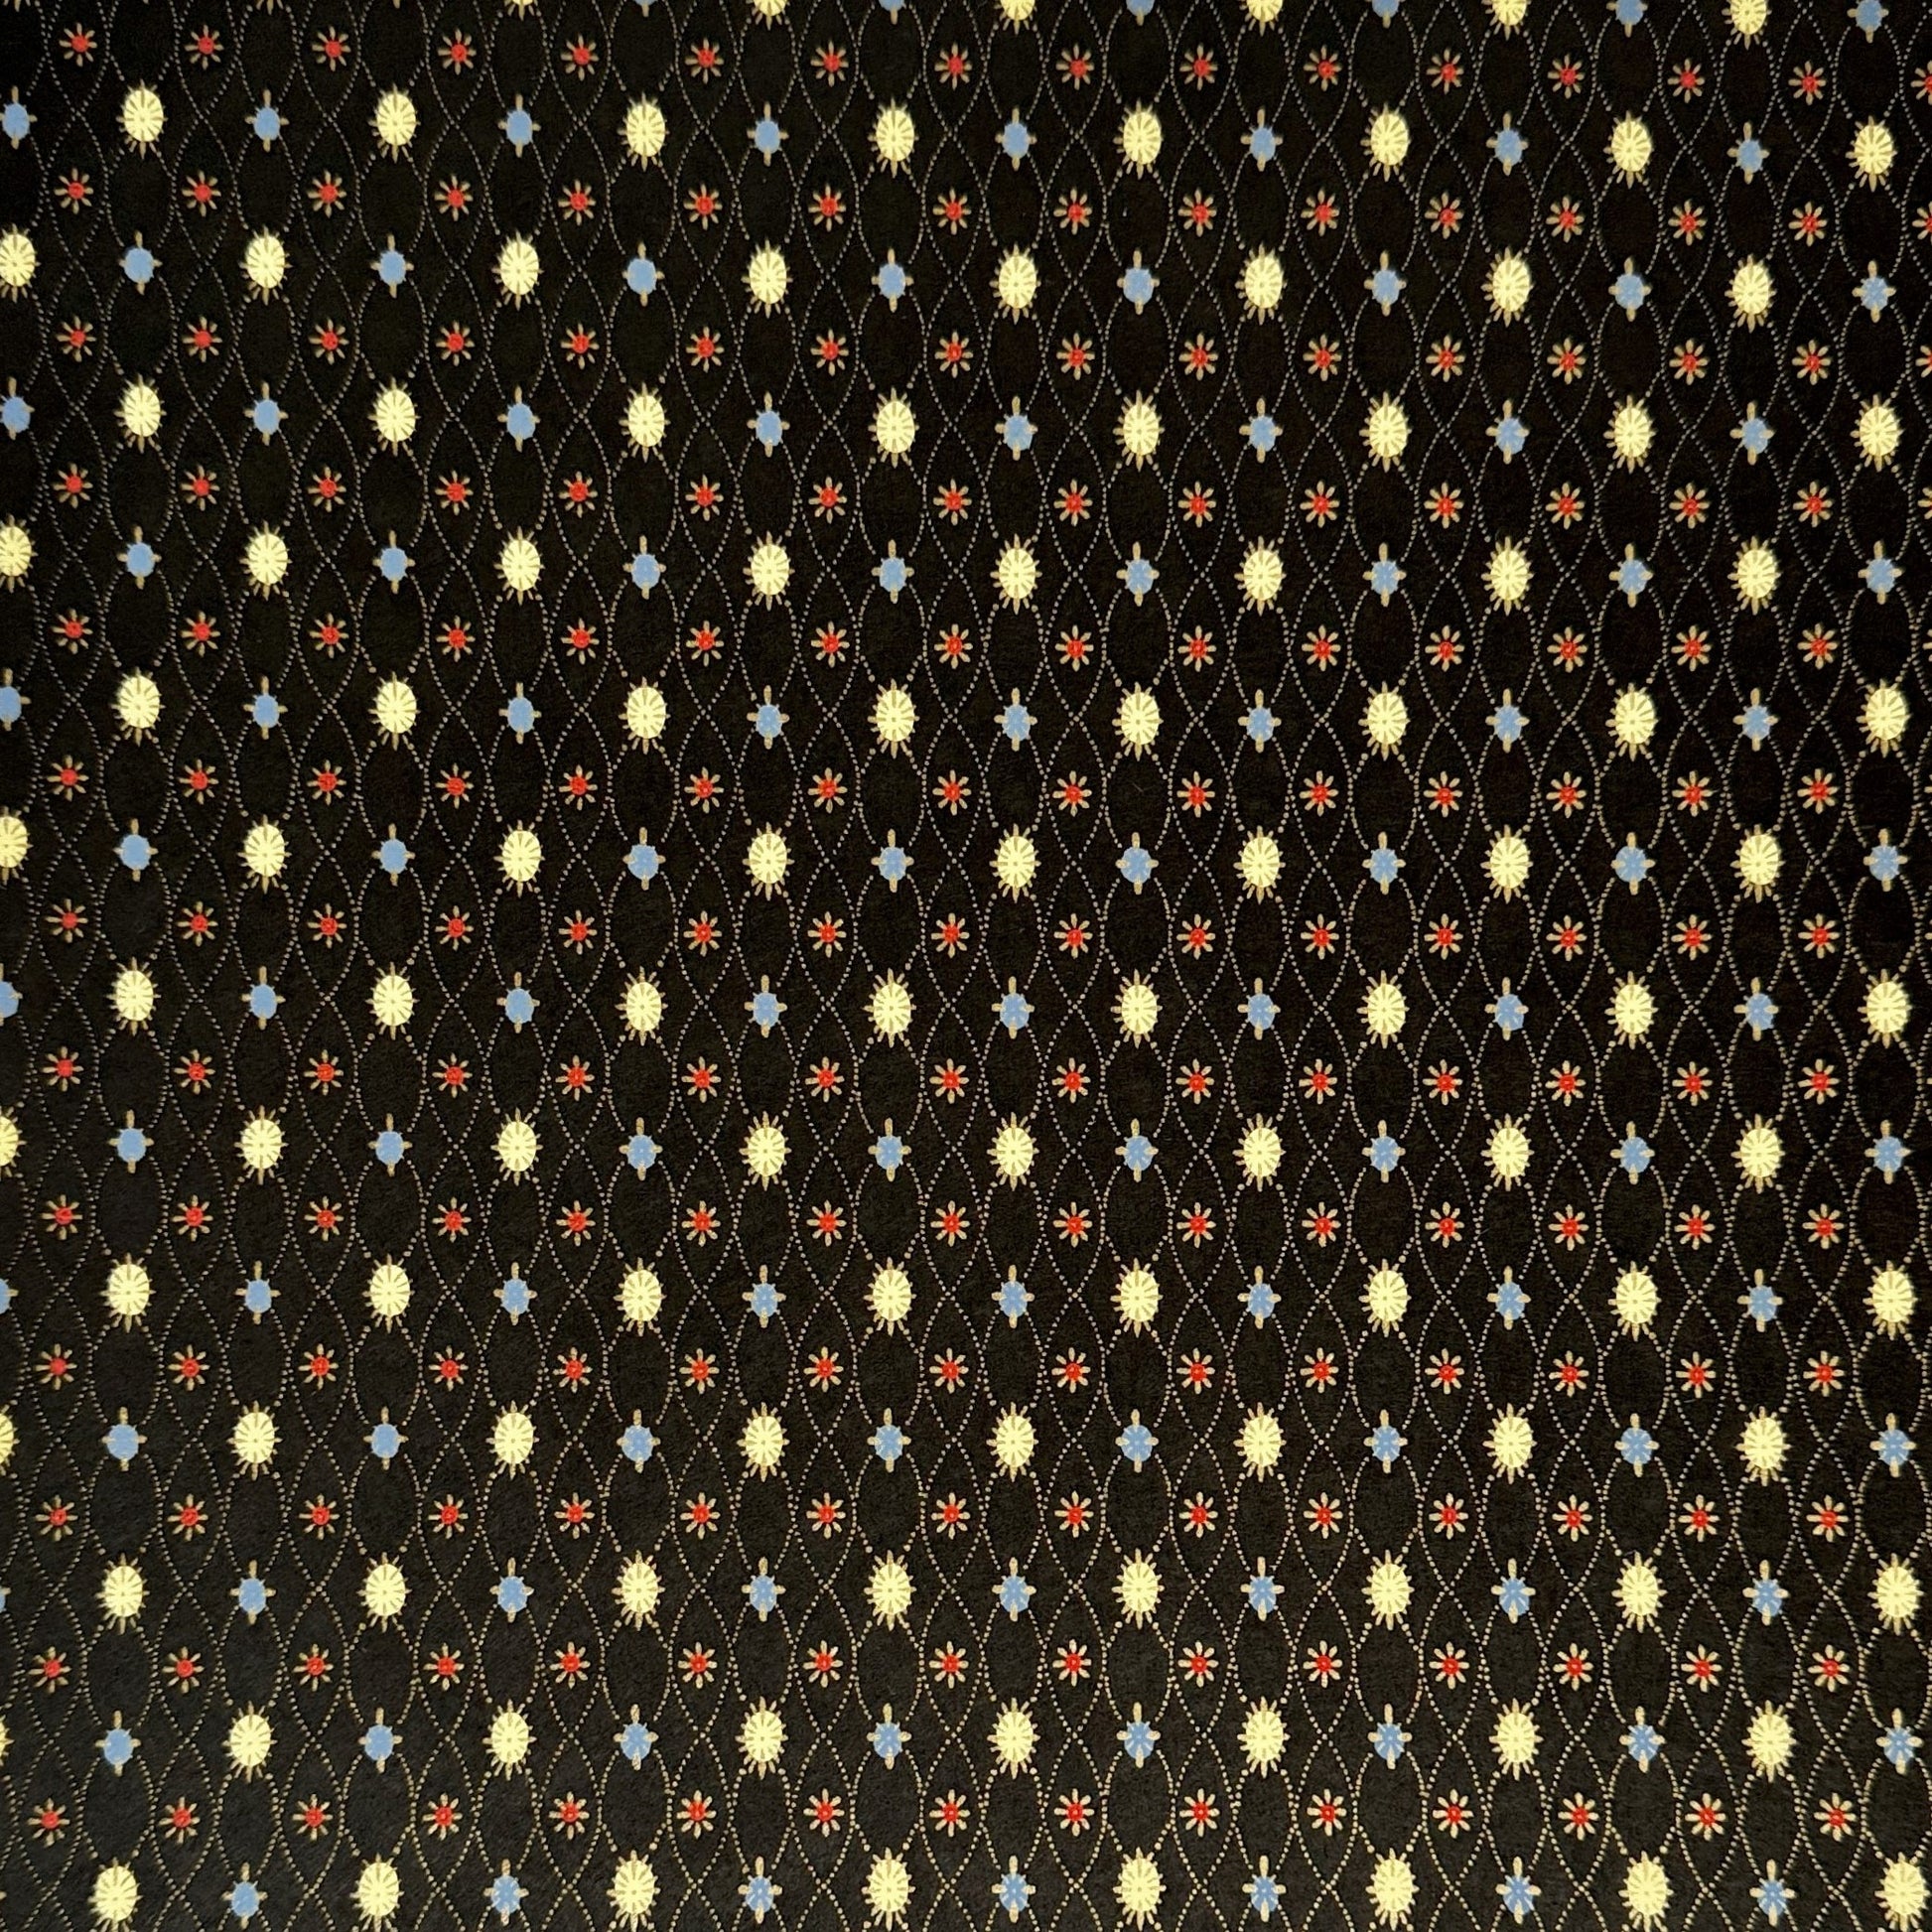 Japanese silkscreen chiyogami paper with a pattern of small repeat motifs in red, blue, lemon and gold on a black background